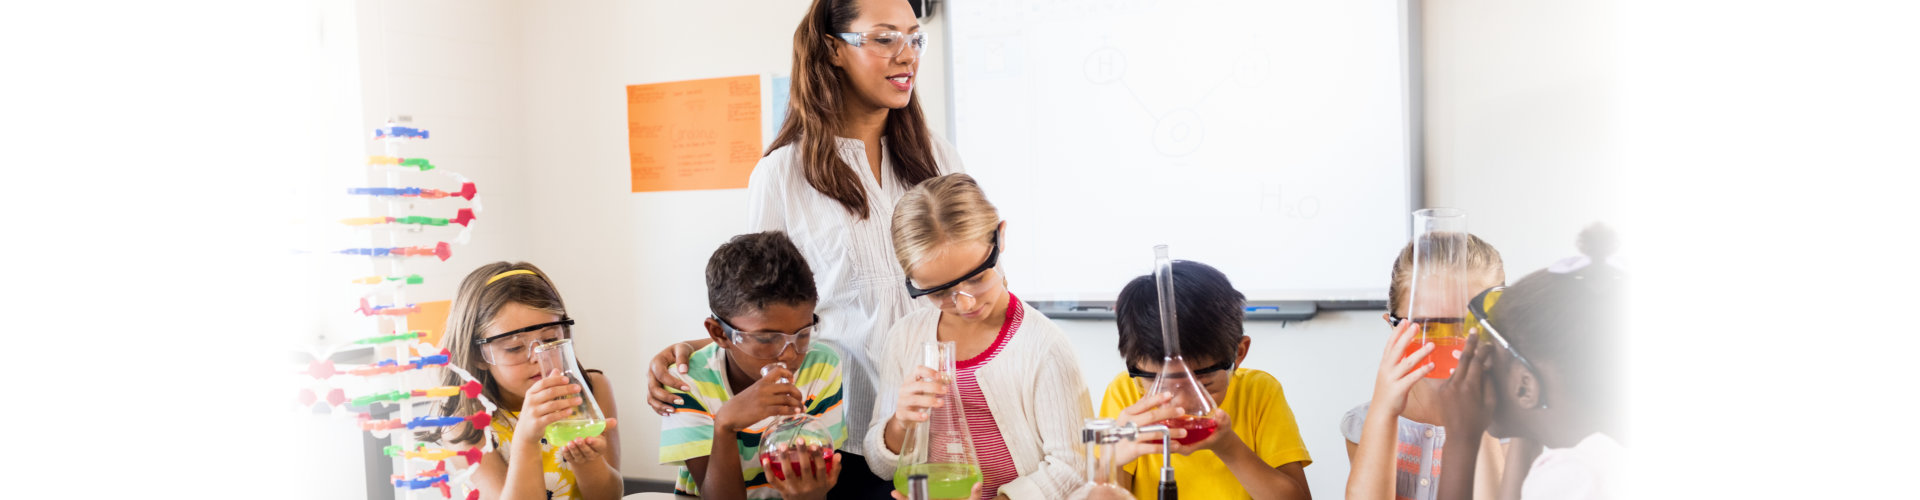 children and teacher having fun on science experiments